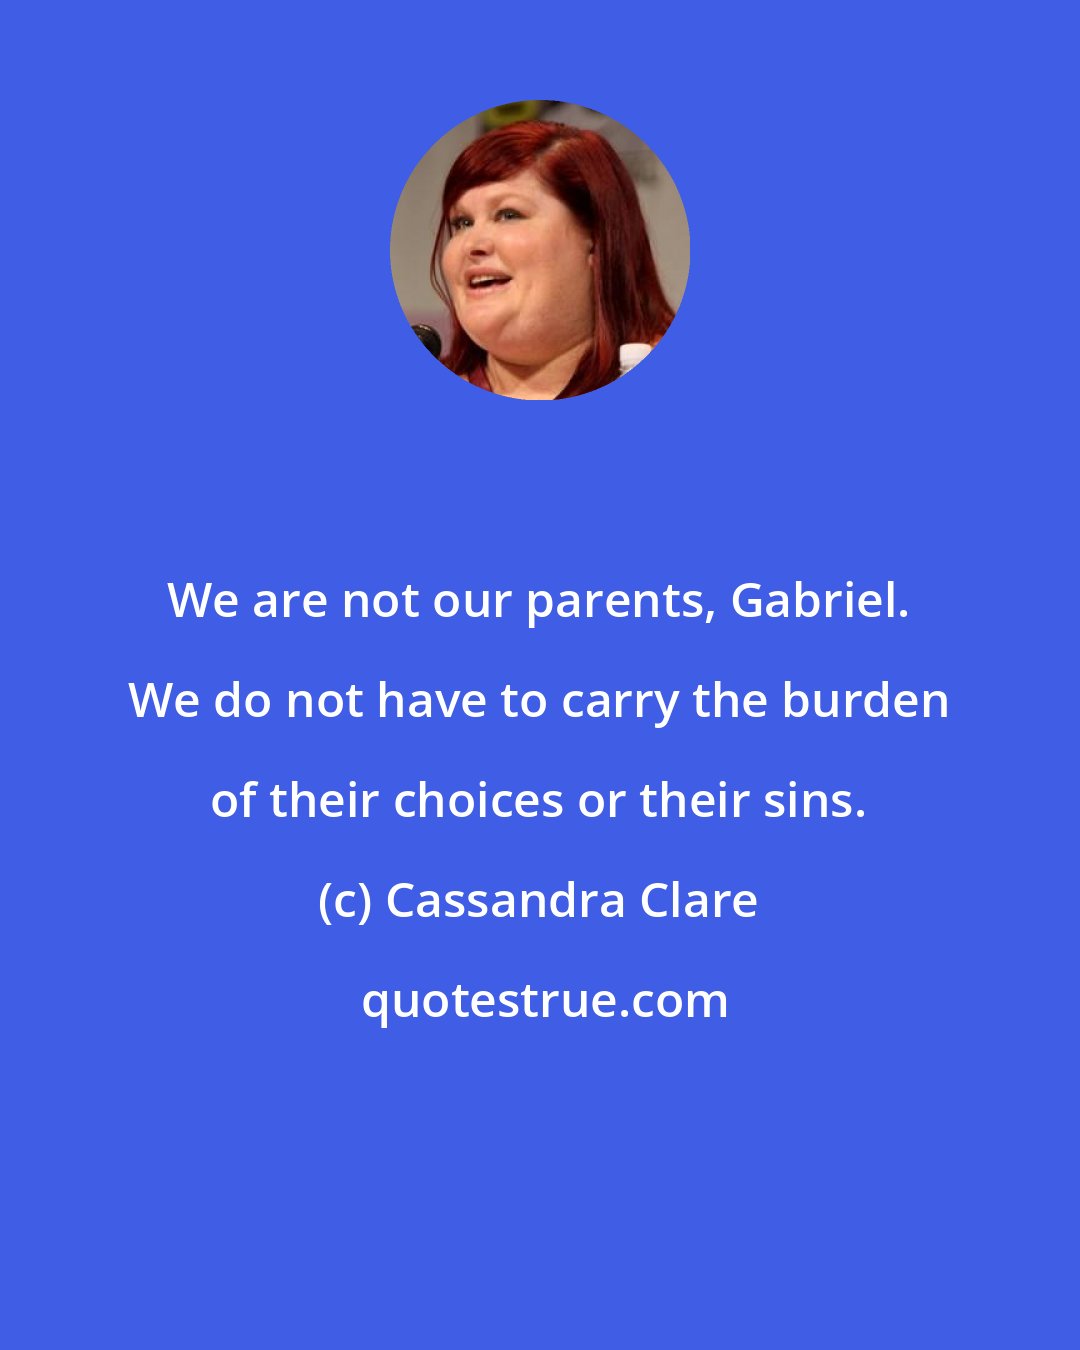 Cassandra Clare: We are not our parents, Gabriel. We do not have to carry the burden of their choices or their sins.